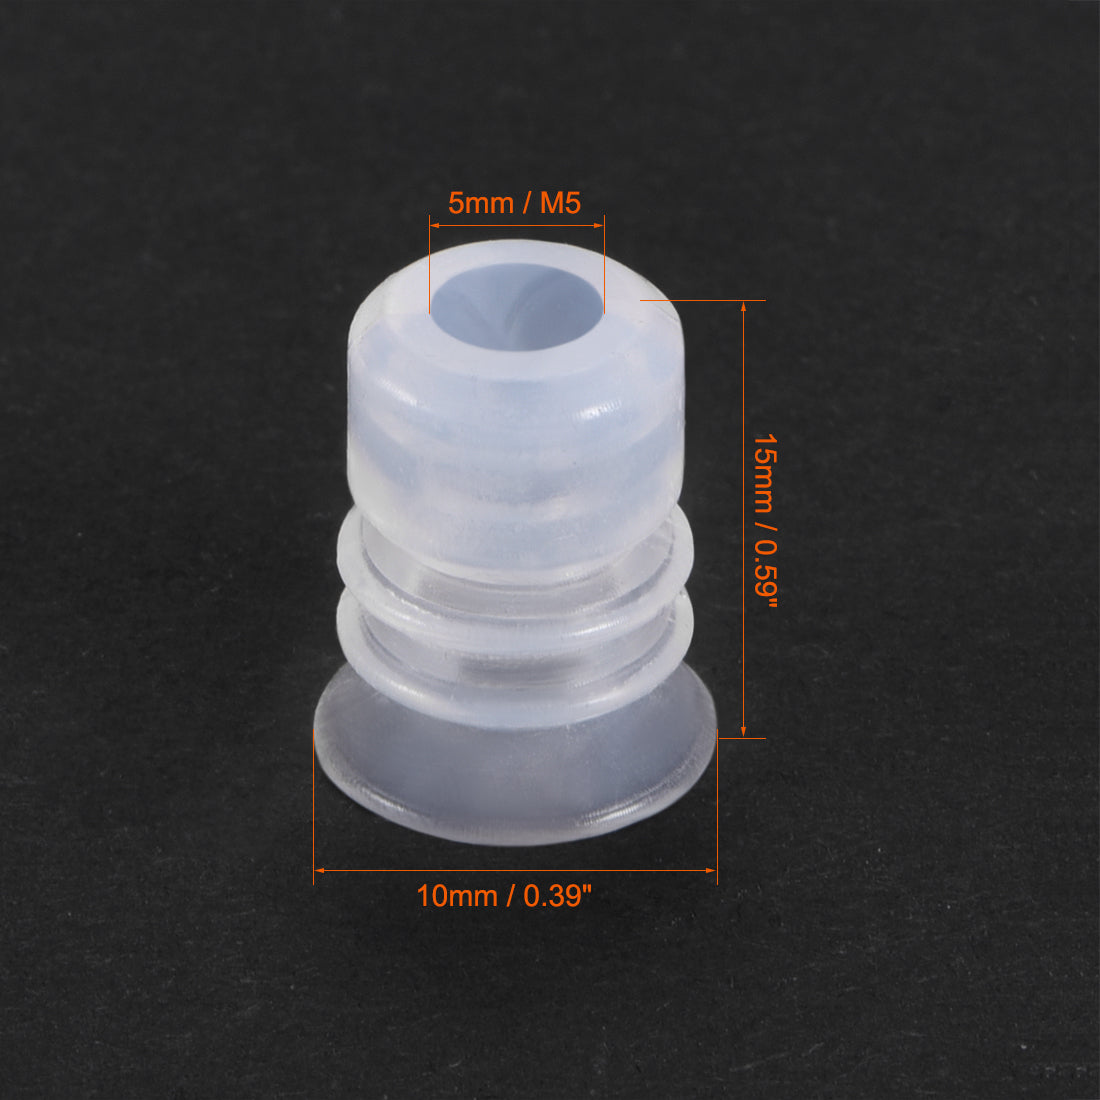 uxcell Uxcell Clear White Soft Silicone Waterproof Vacuum Suction Cup 10mmx5mm Bellows Suction Cup,4pcs